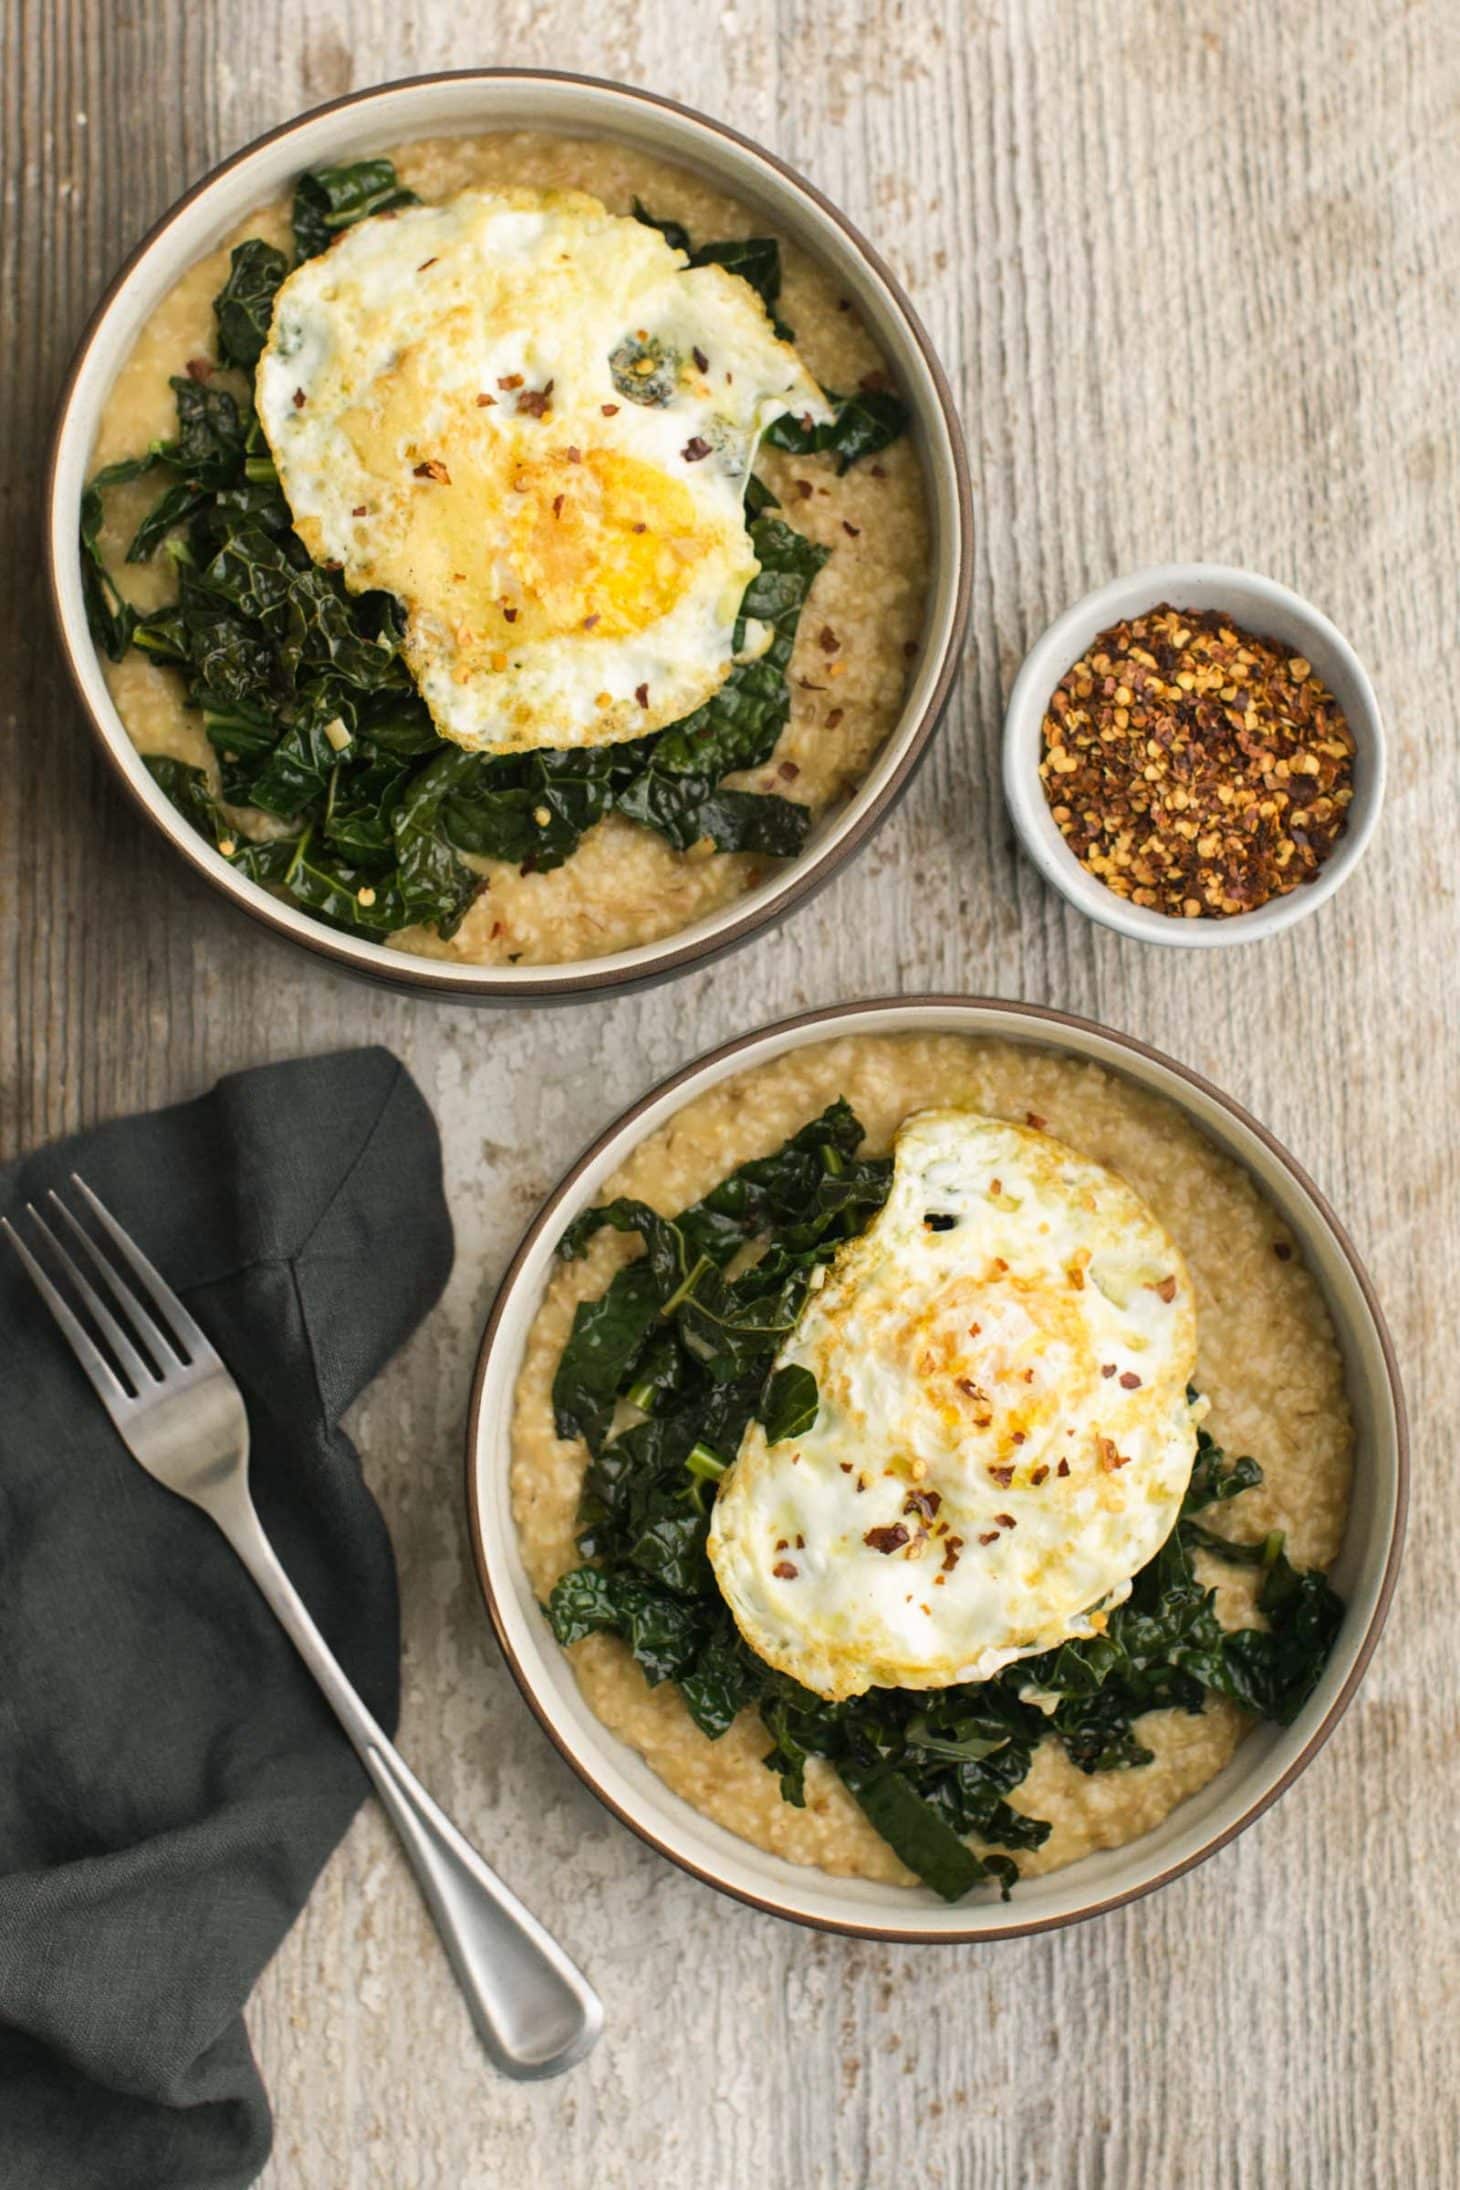 Savory Oatmeal with Garlicky Kale with Fried Eggs | @naturallylella